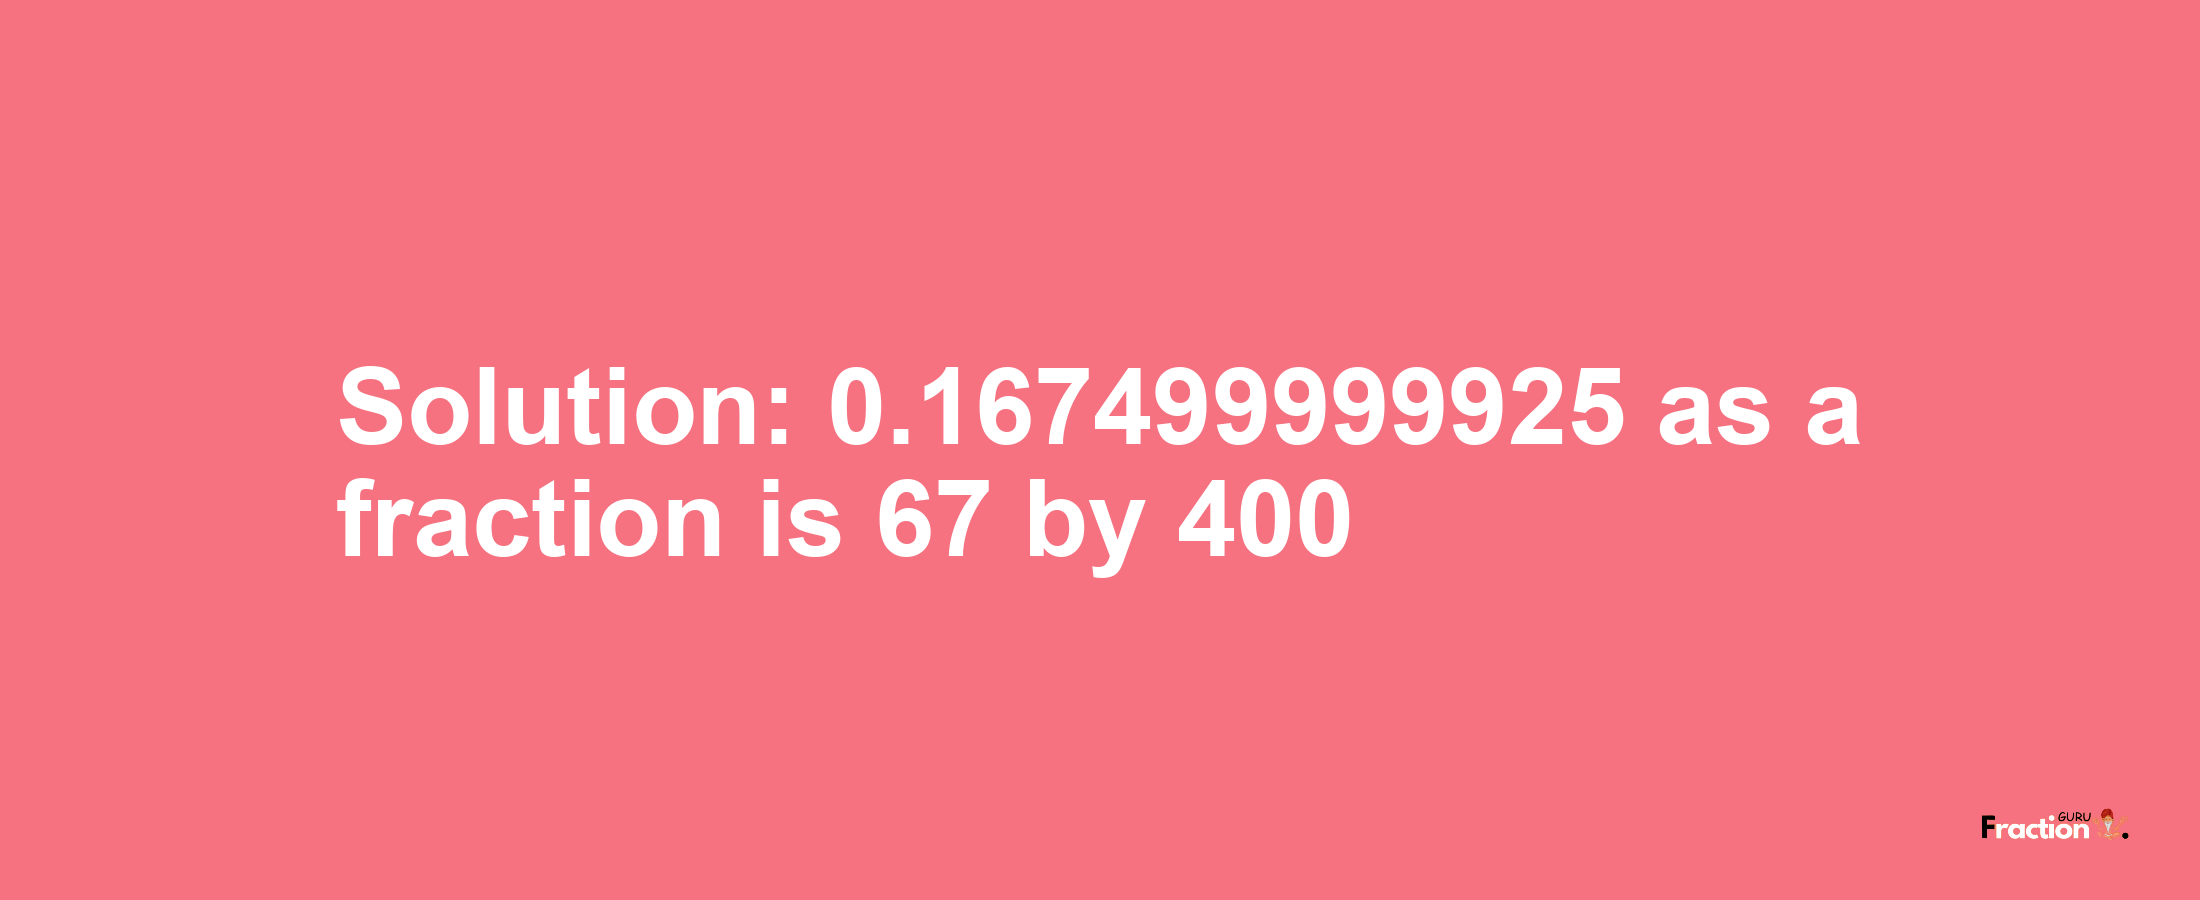 Solution:0.167499999925 as a fraction is 67/400